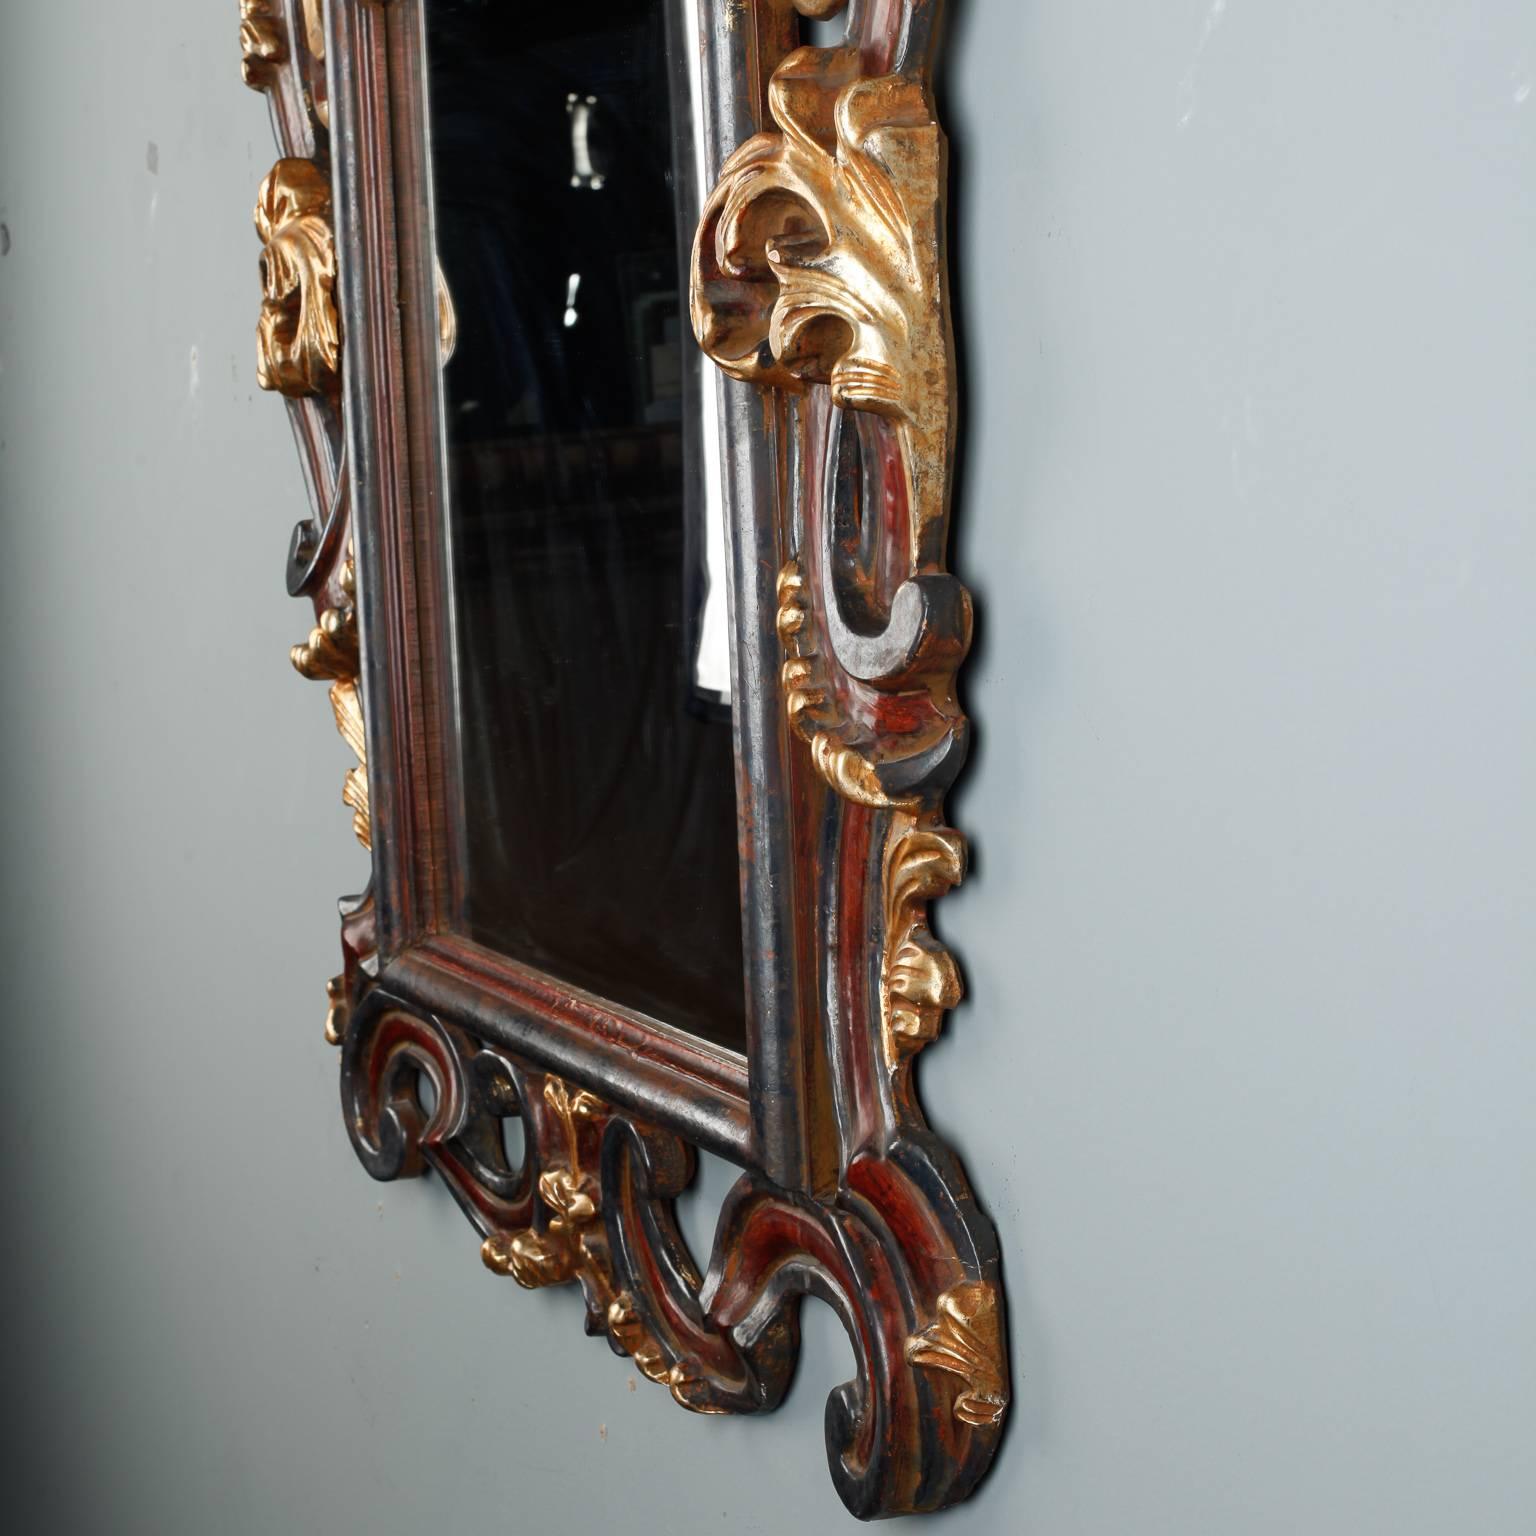 Carved Ornate Italian Wood Gilt and Painted Mirror